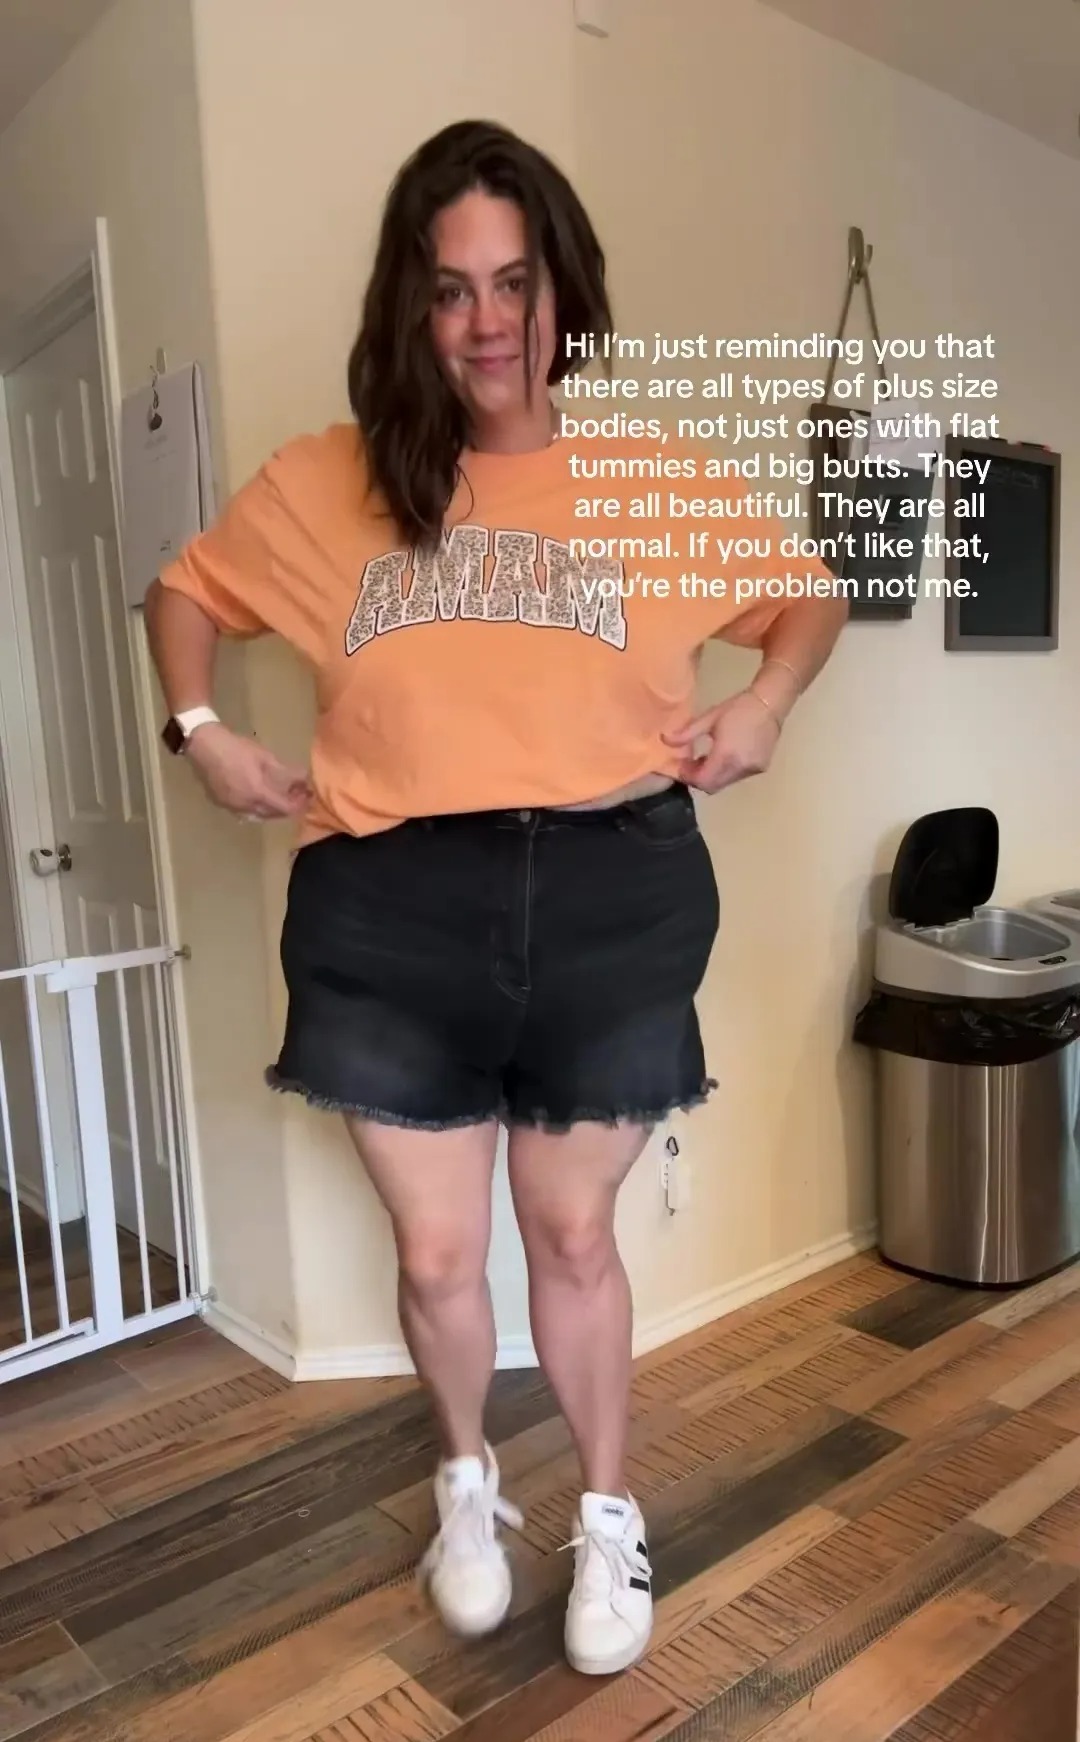 Texas-based Lindsey explained that she has a condition commonly known as 'apron belly'